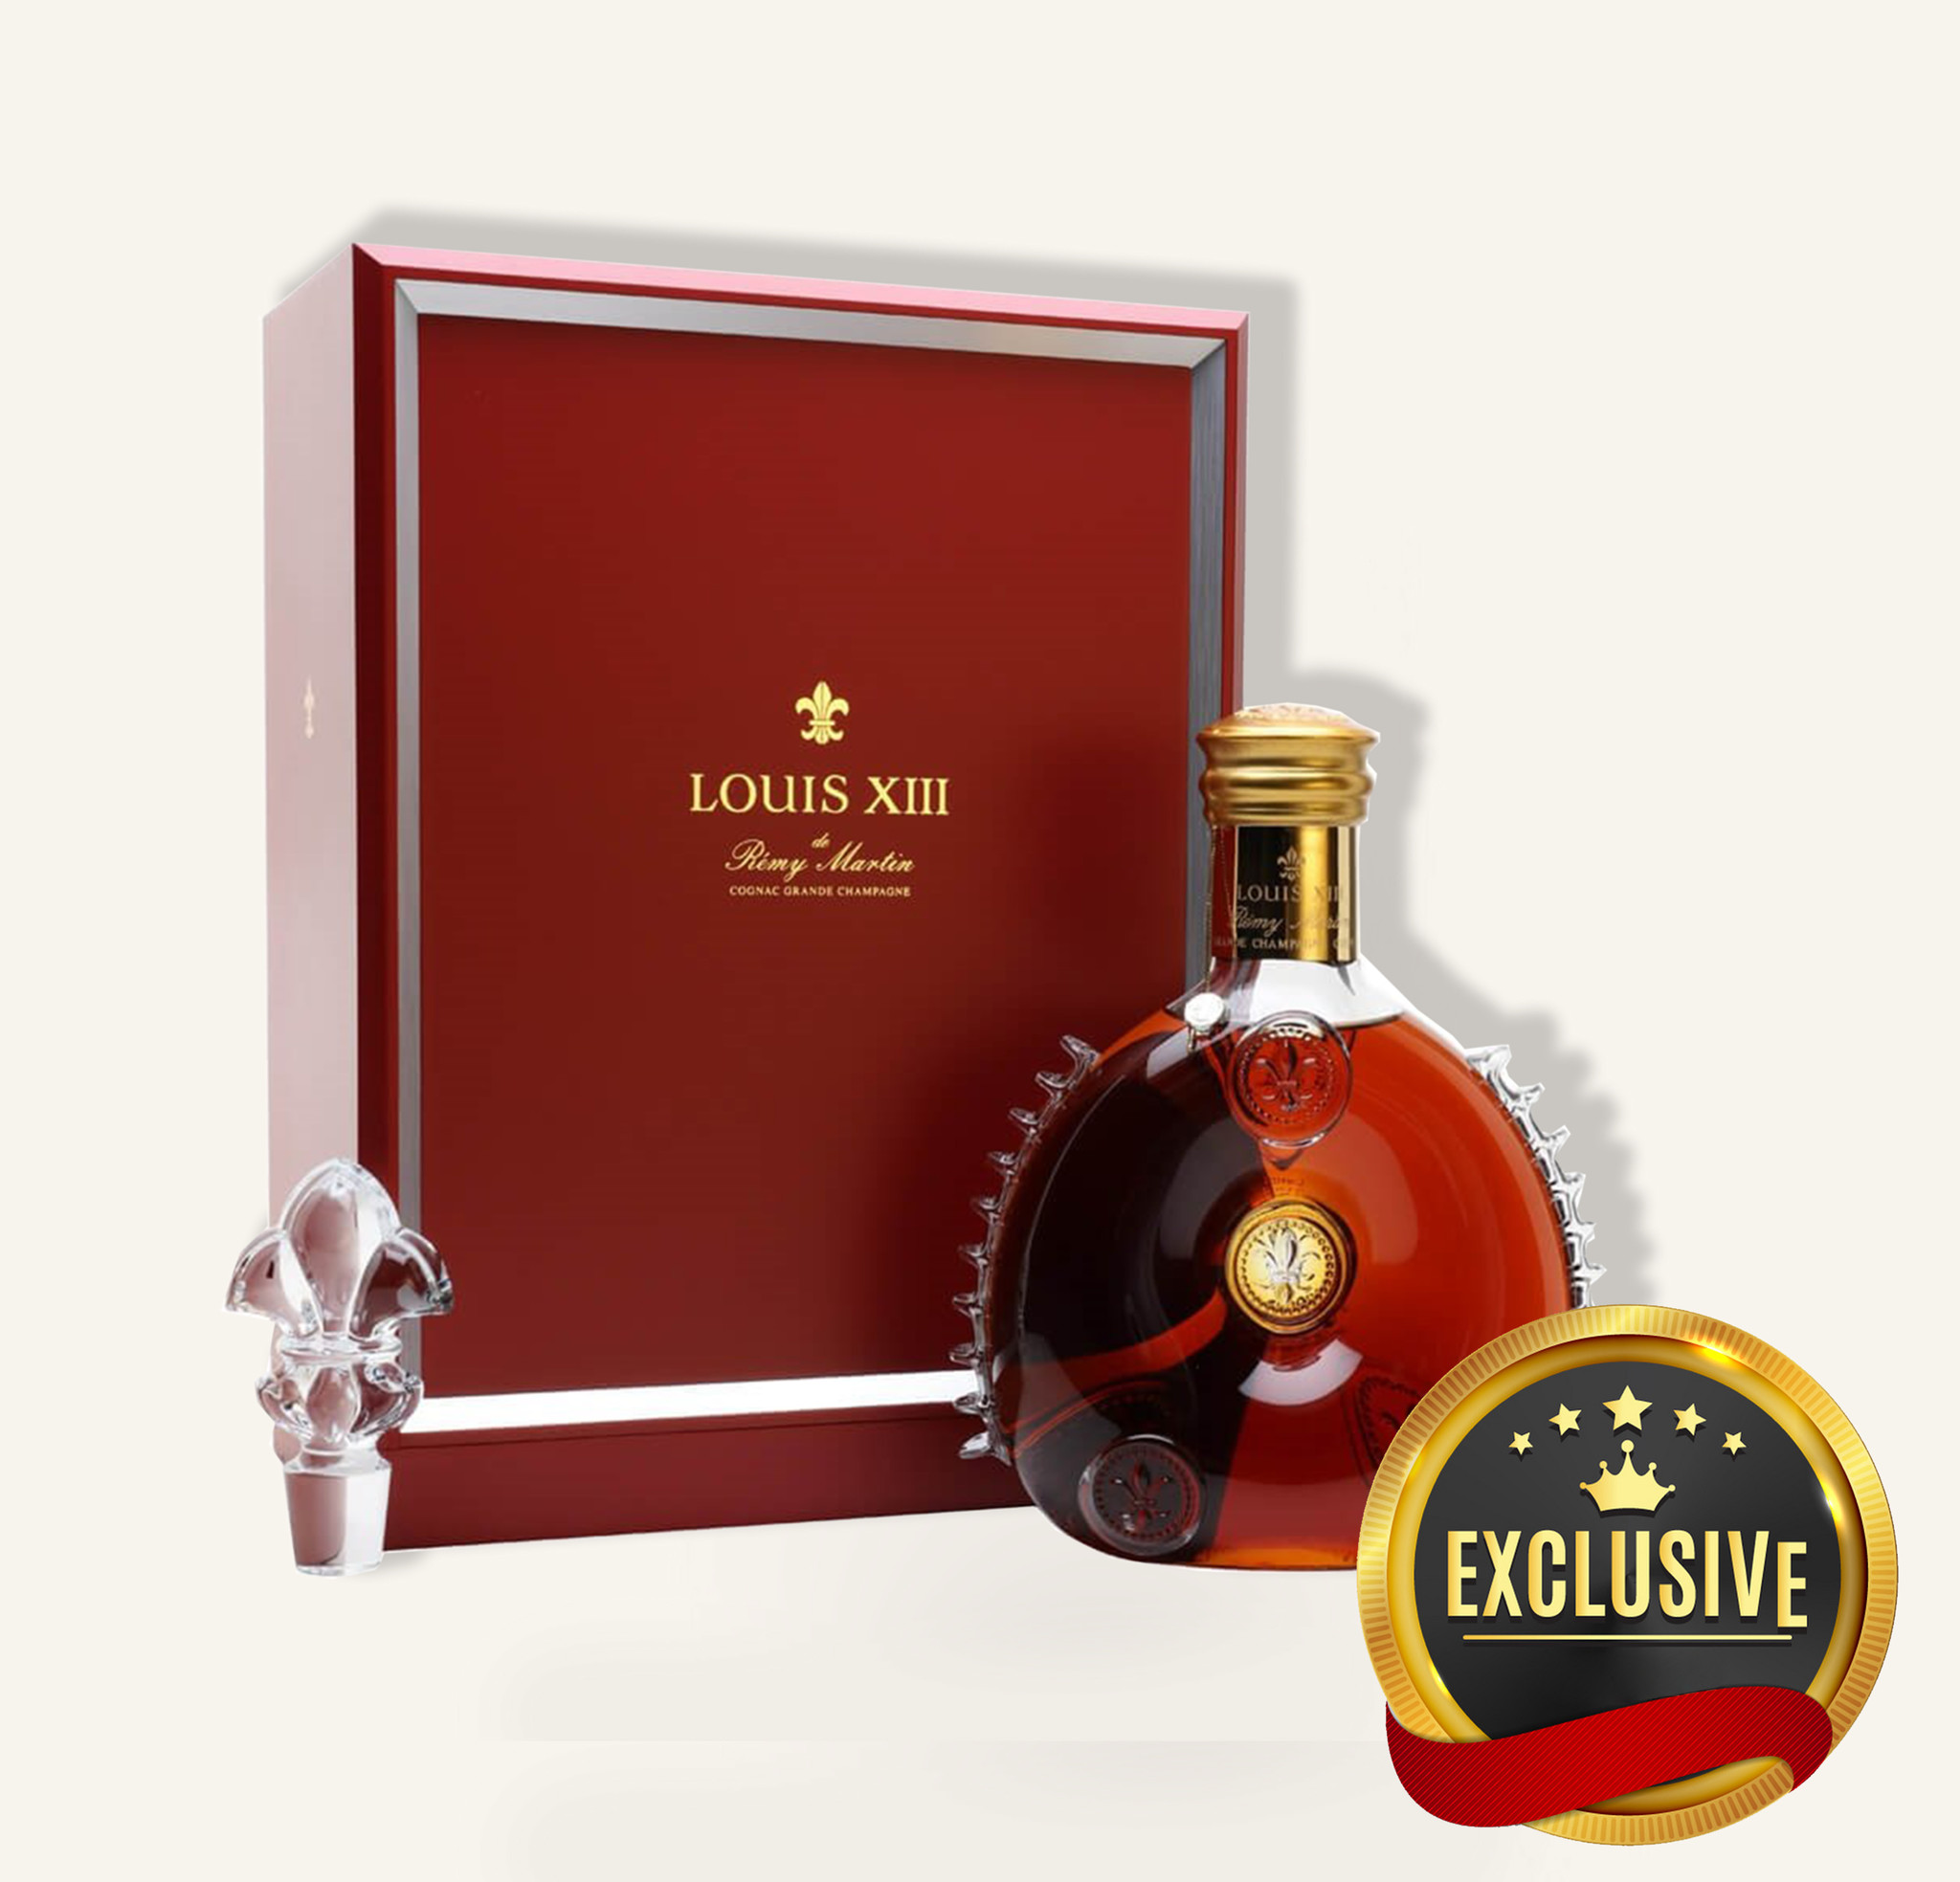 Rémy Martin Louis XIII Cognac 700ml $3900 FREE DELIVERY